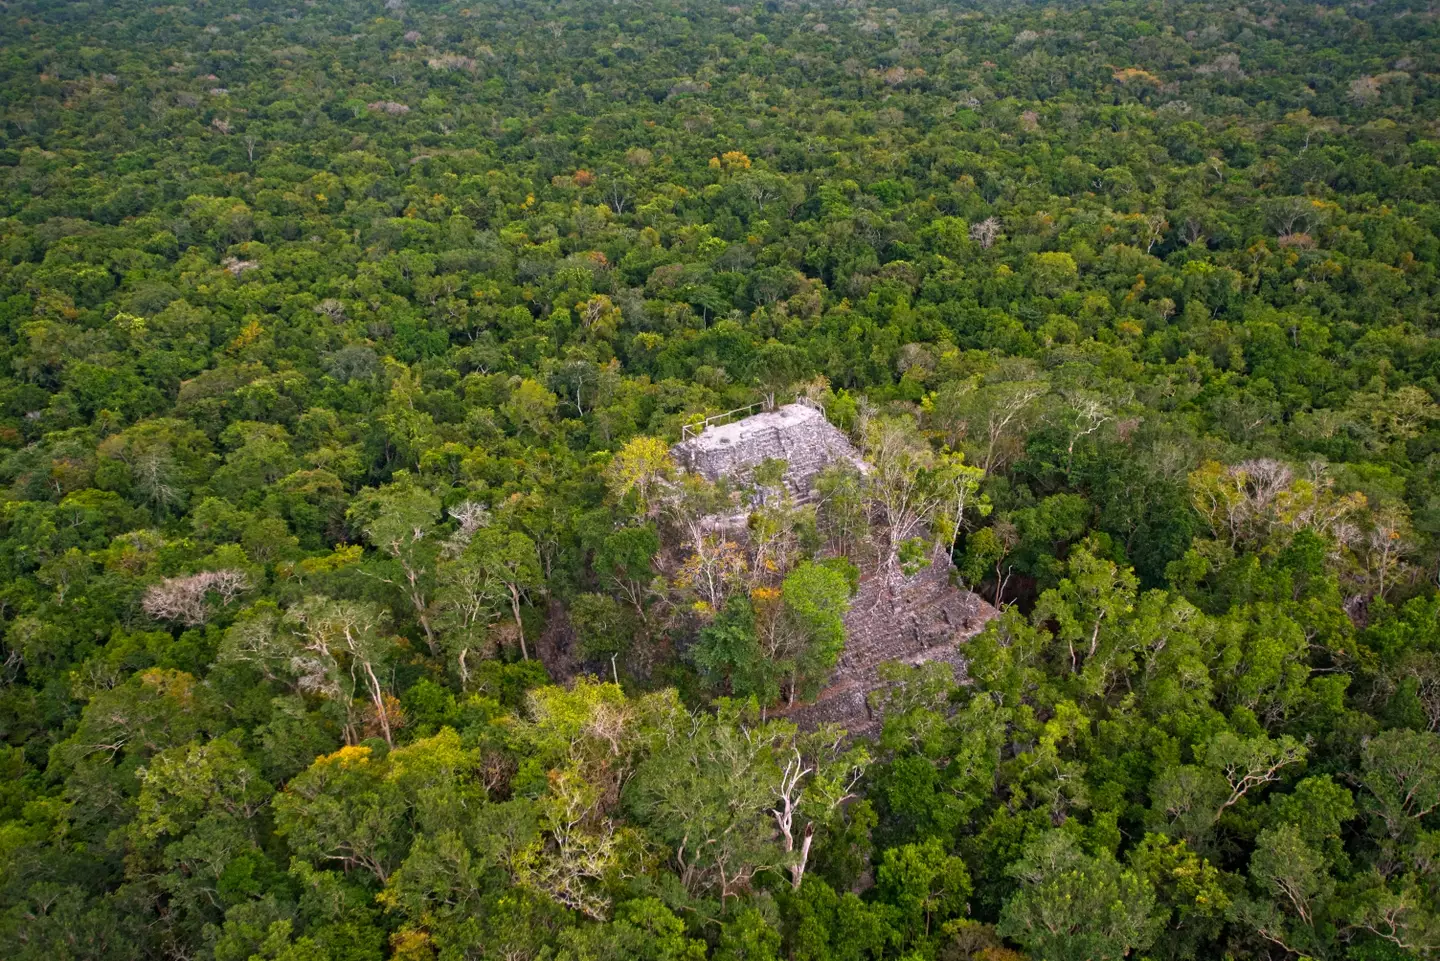 Hundreds of ancient settlements built in around 1,000 BC had been hidden by the El Mirador jungle in Guatemala.